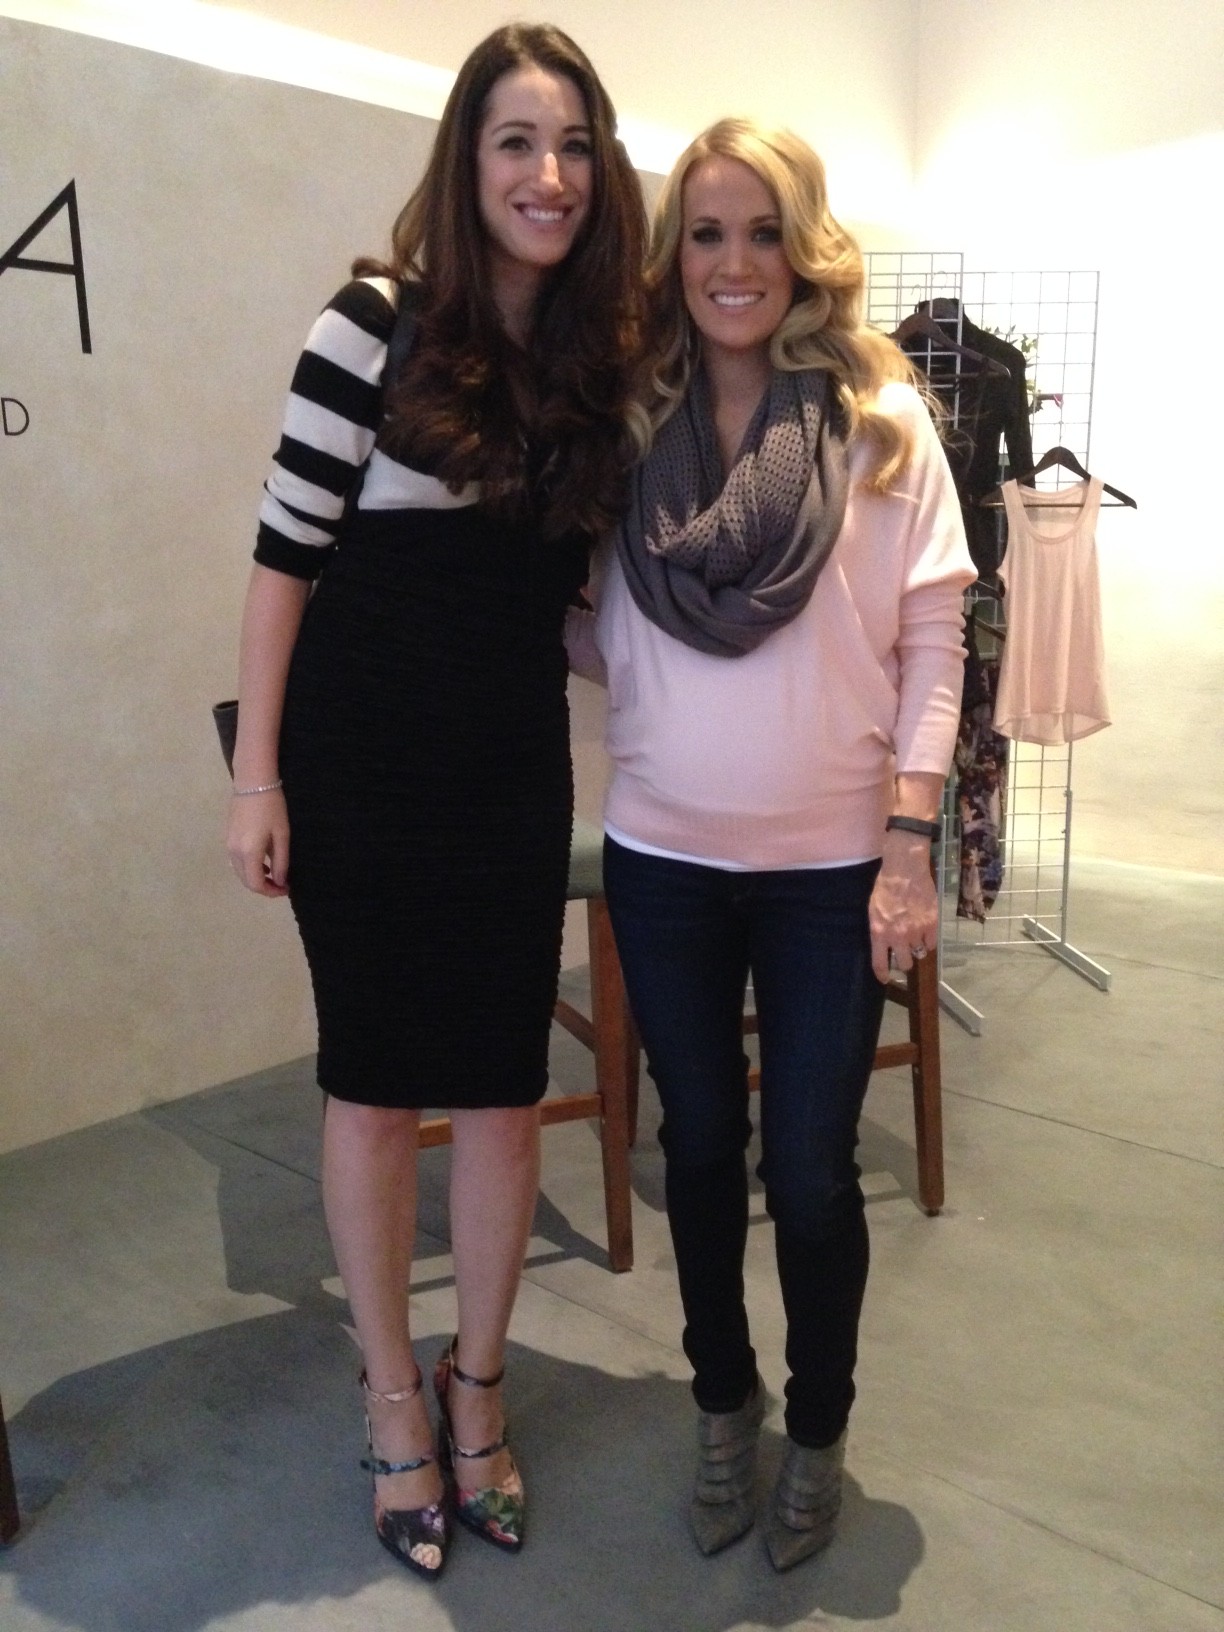 Carrie Underwood - Check out Carrie wearing CALIA by Carrie on the